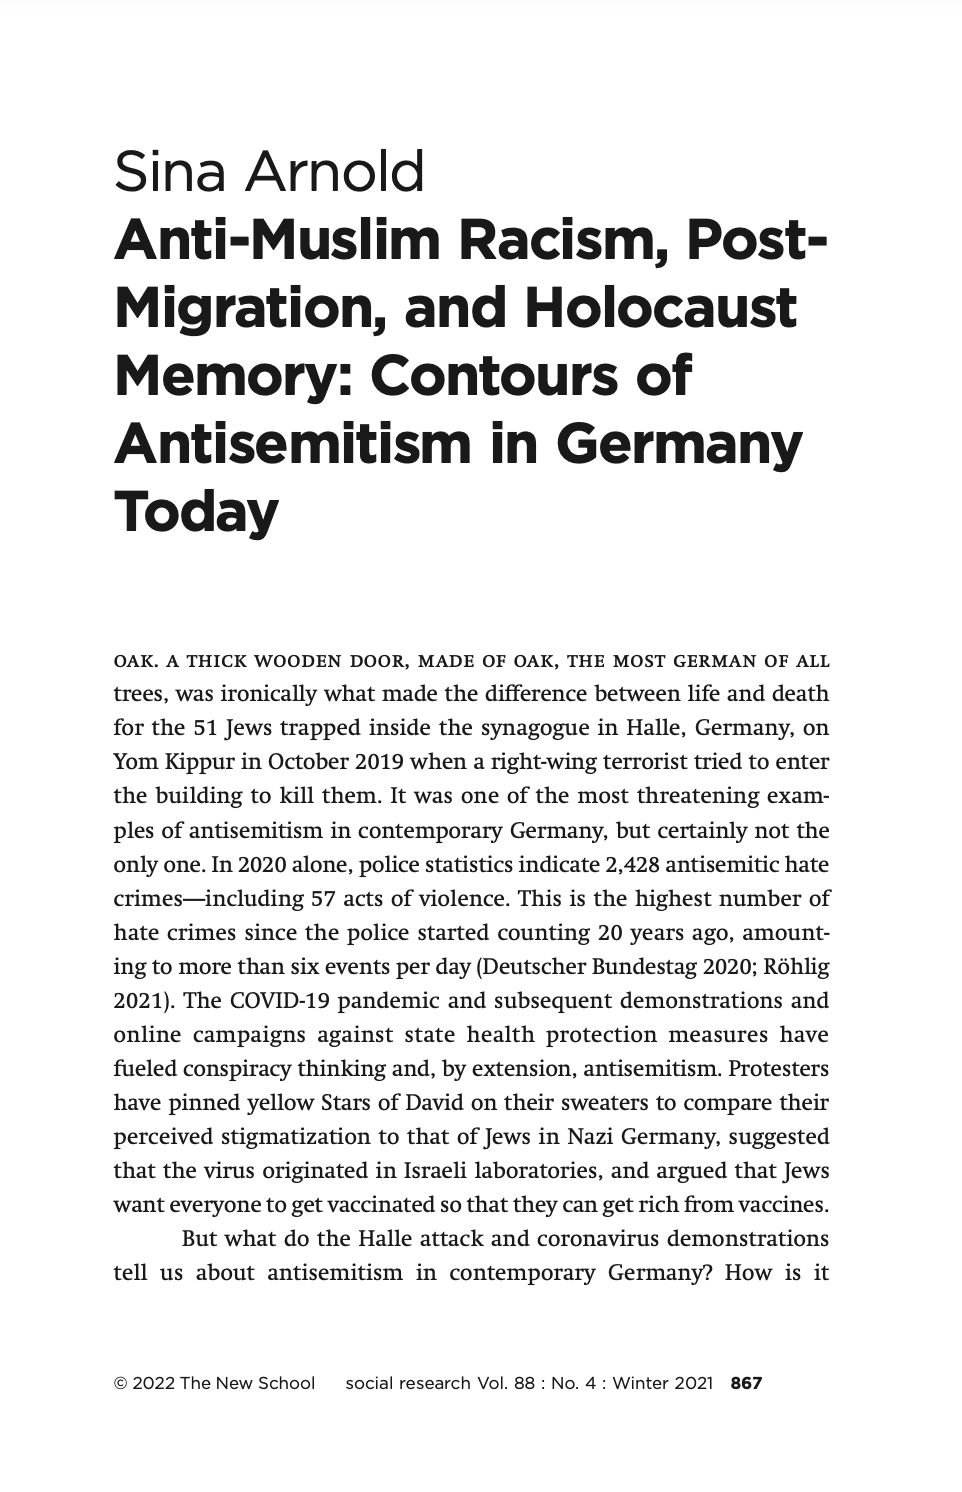 Anti-Muslim Racism, Post-Migration, and Holocaust Memory: Contours of Antisemitism in Germany Today